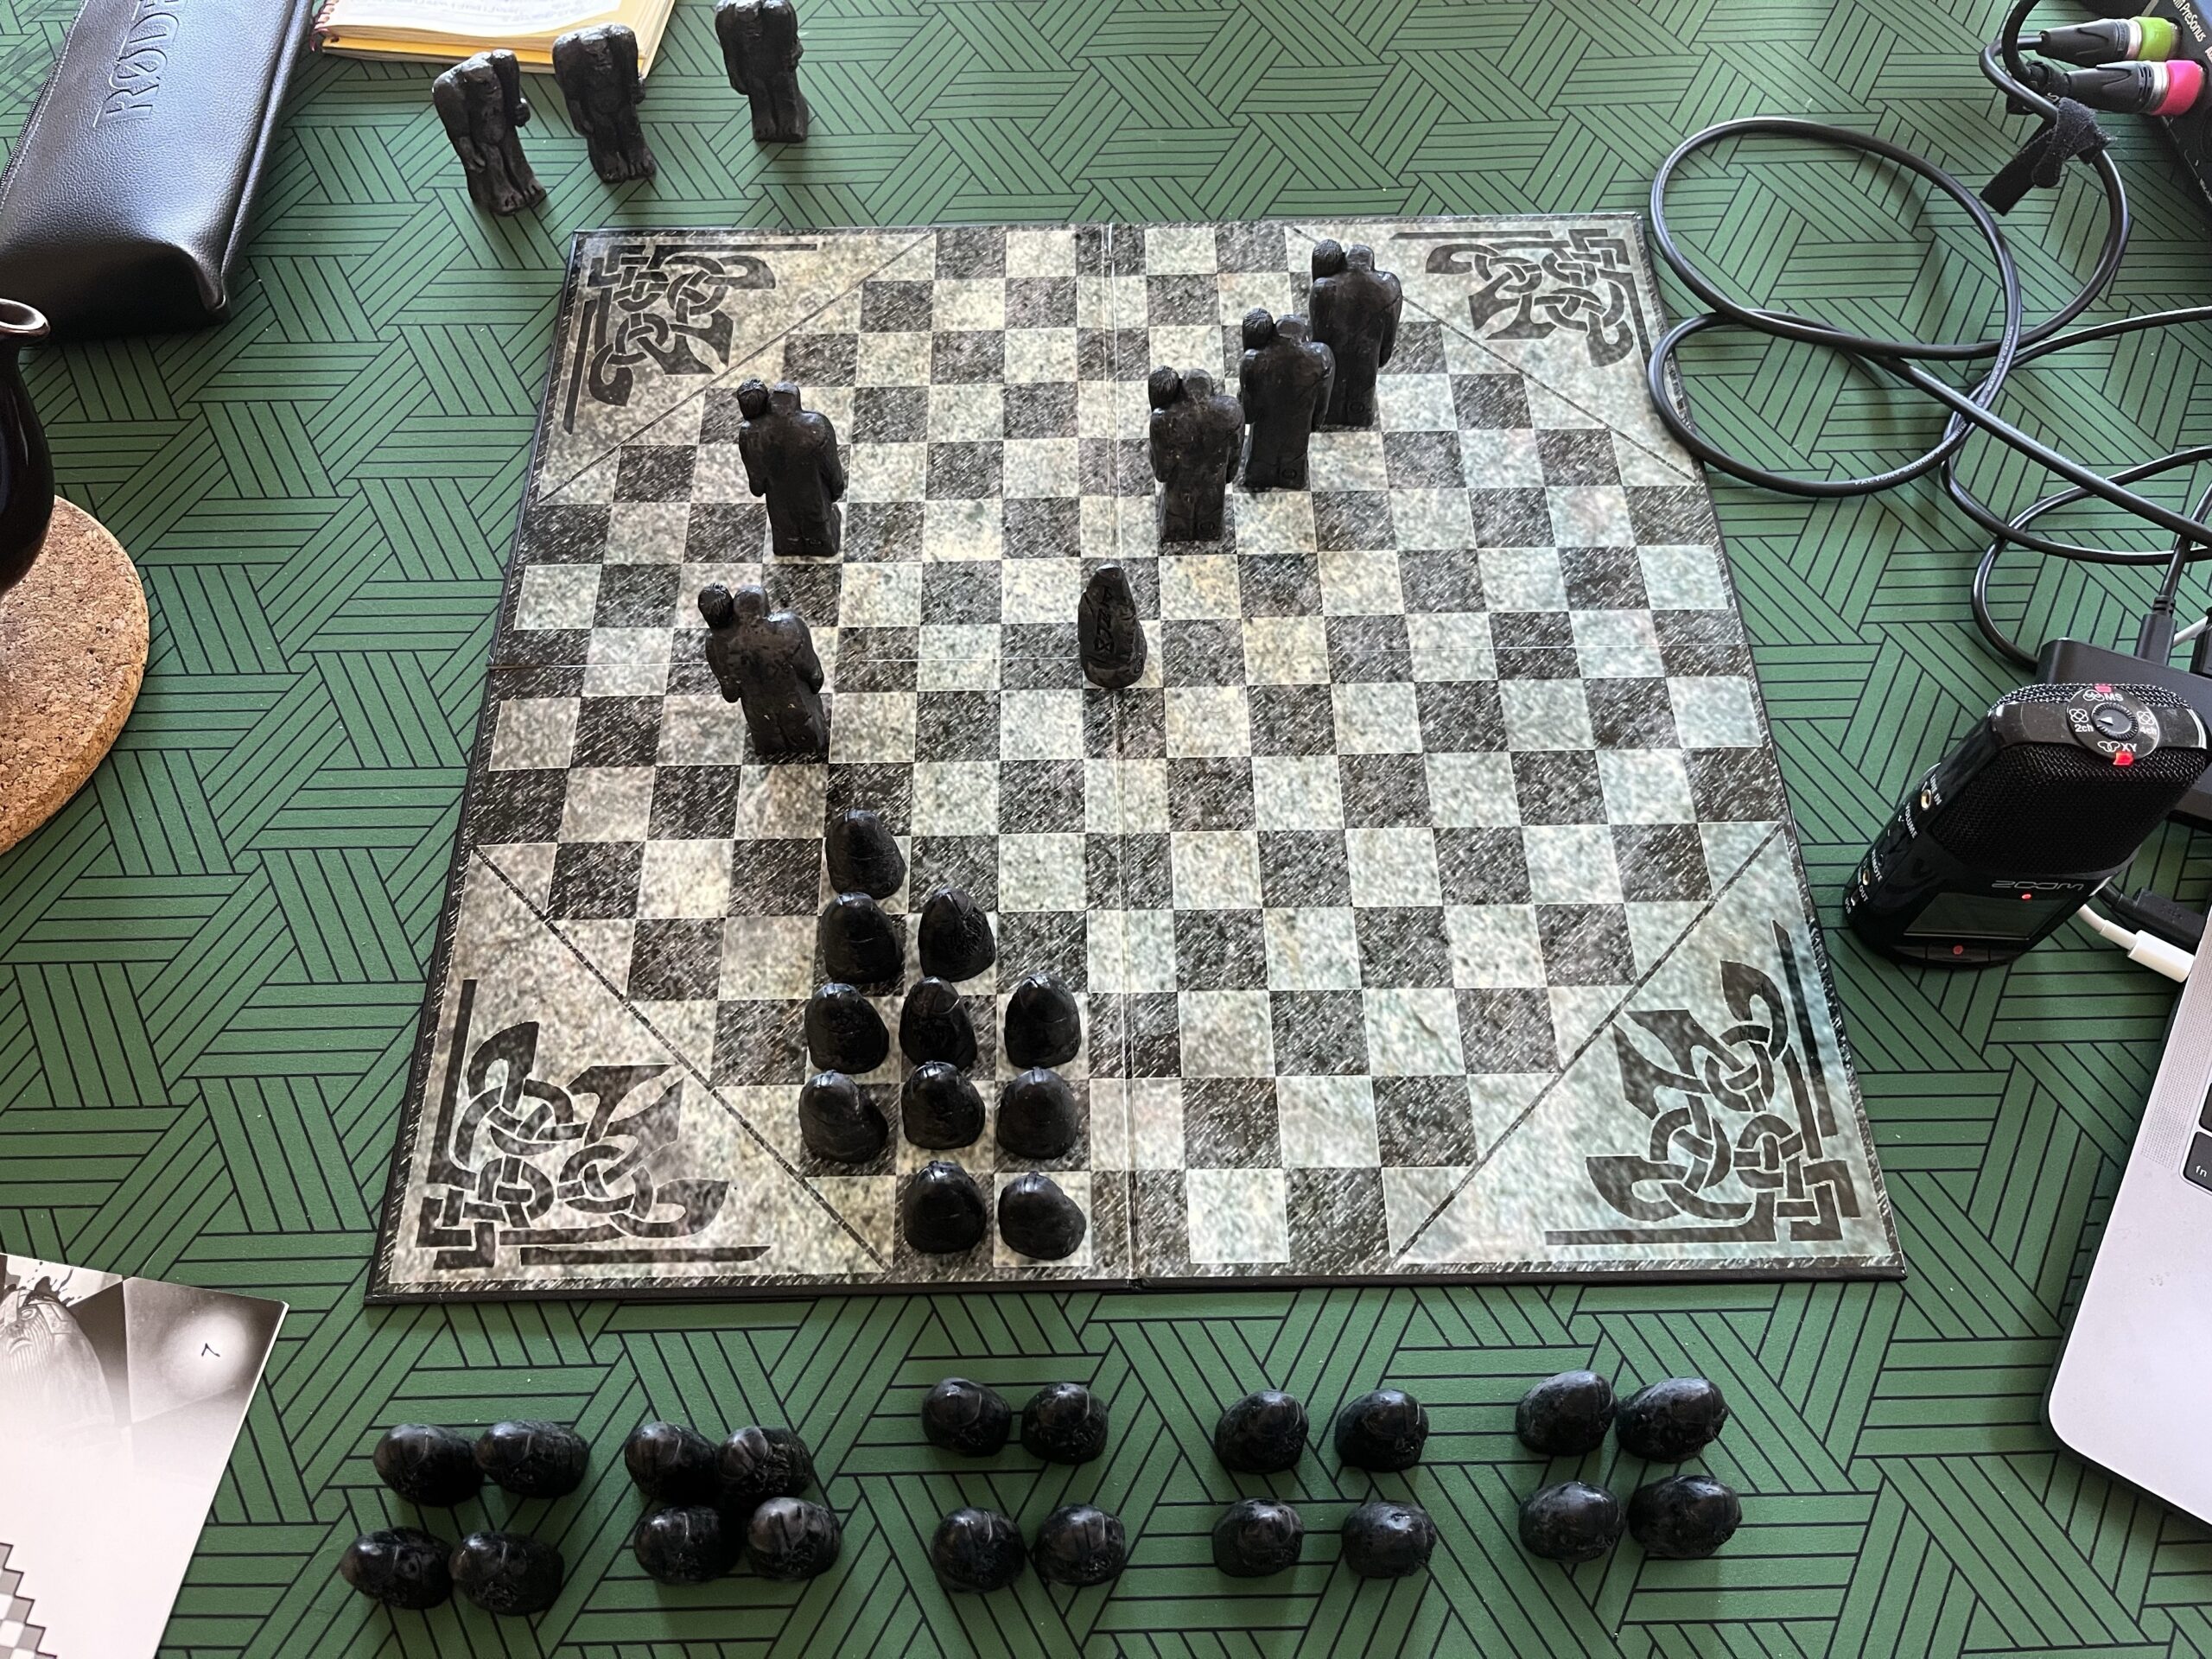 A square board with an octagonal arrangement of black and white squares sits on a green patterned matt on a wooden table. On the board are dark-coloured playing pieces, some large, humanoid shaped ones holding up clubs, and some smaller, stylised bullet-shaped pieces with bearded faces. The smaller pieces are in a group on the bottom edge of the board, while the larger ones are on the left and top right of the board. Eight of the smaller pieces are off the board, on the matt closer to the camera. About two-thirds of the smaller pieces are off the board at the bottom, close to the camera, while three of the larger pieces are off the board at the top.